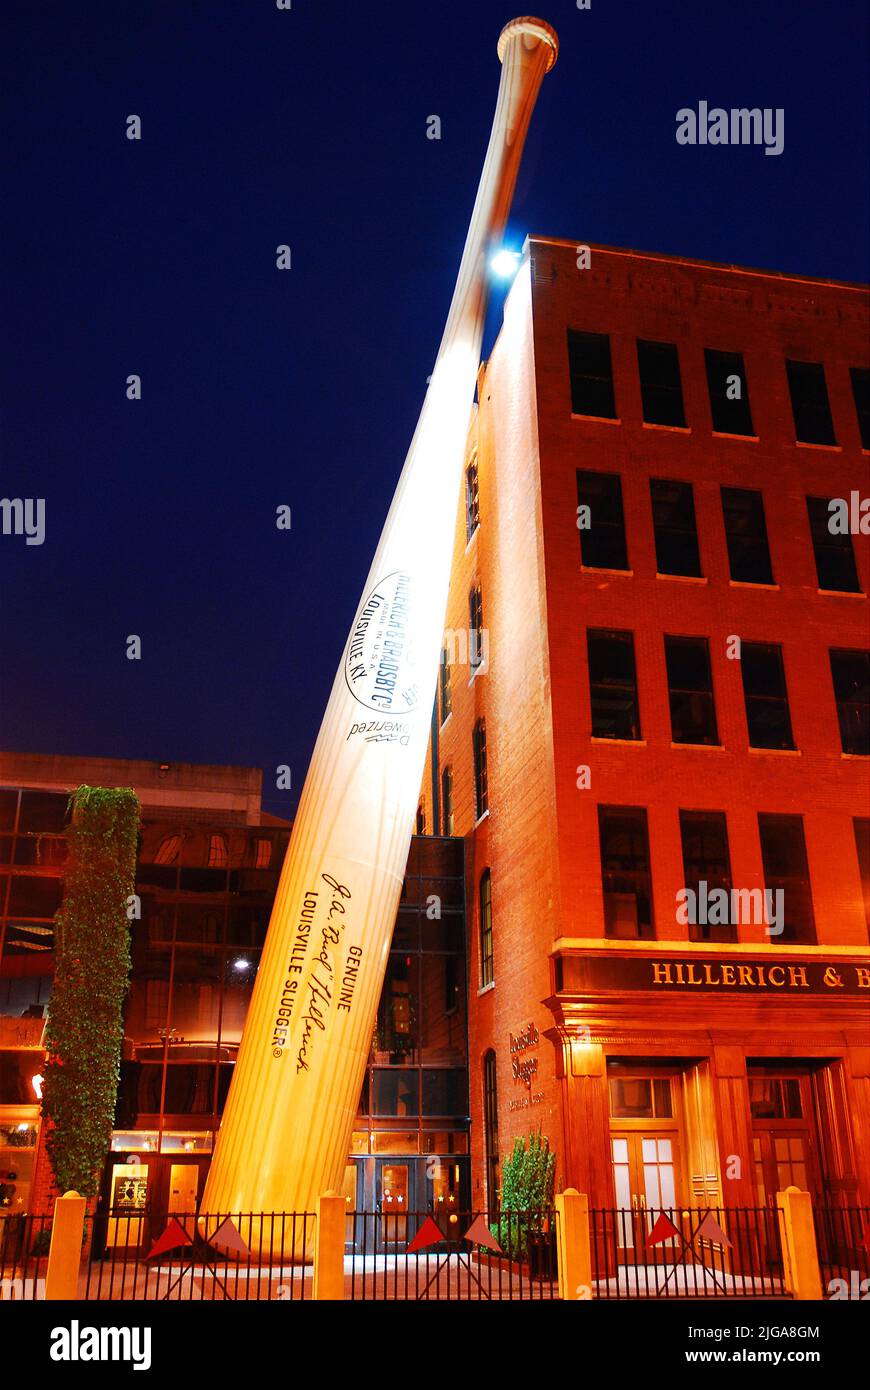 A large Louisville Slugger baseball bat leans against the sport equipment factory of Hillerich and Bradsby in downtown Louisville Kentucky Stock Photo